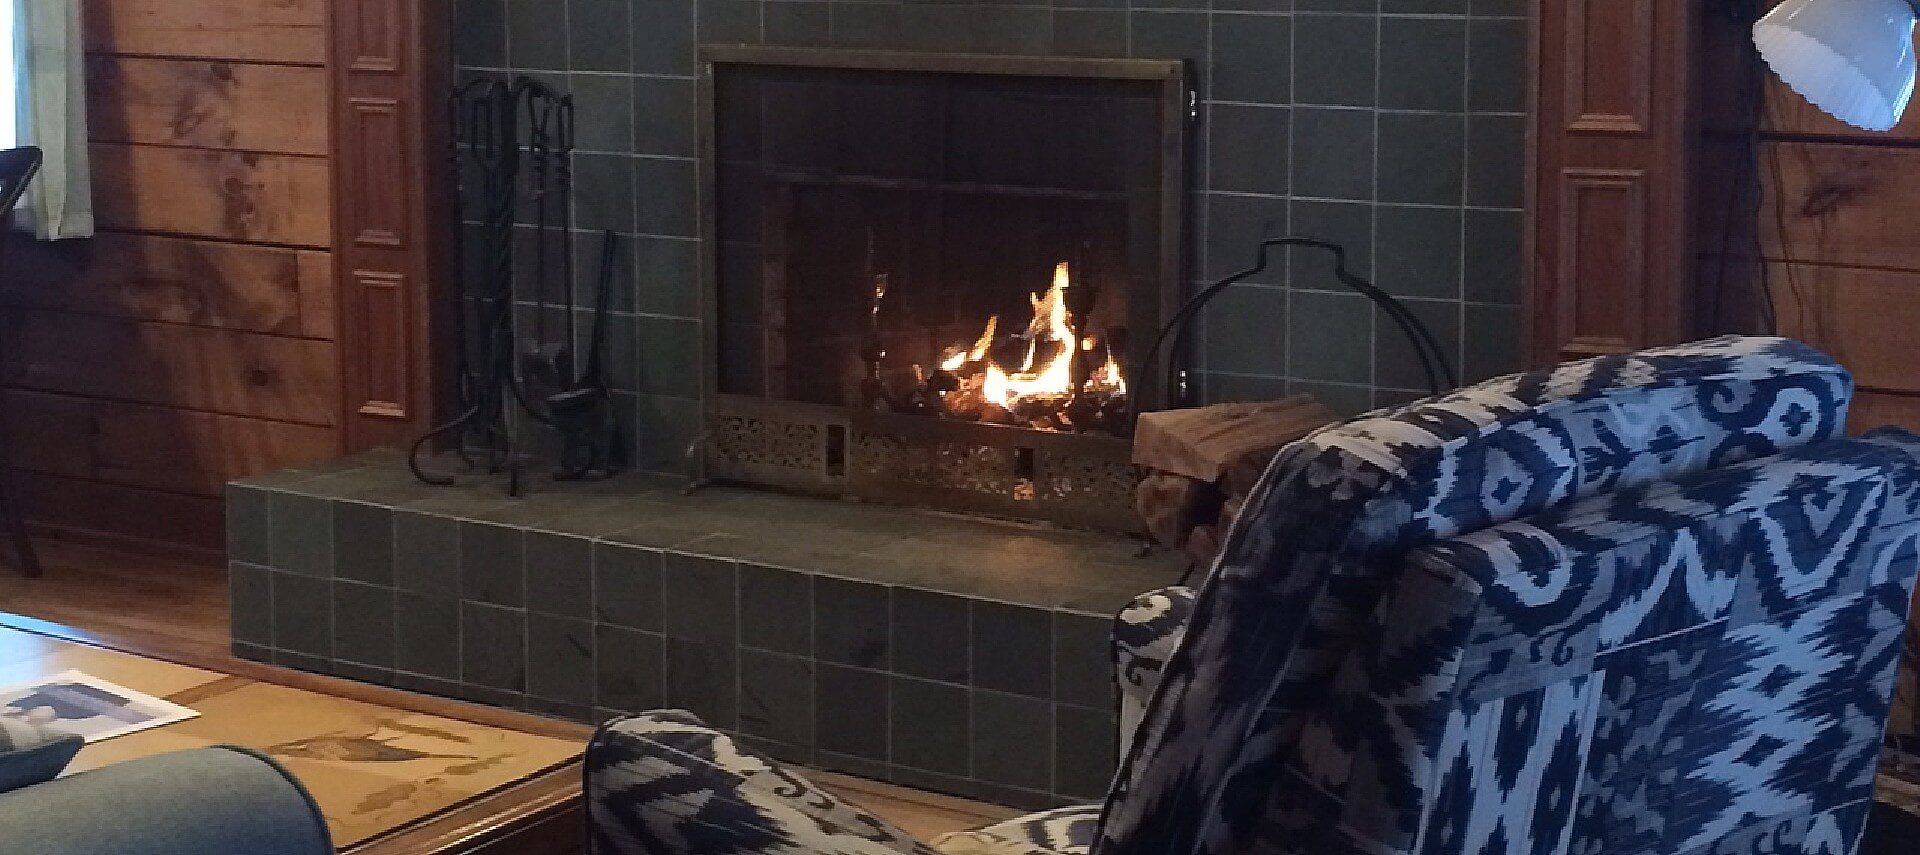 Fire roaring in a grey tiled fireplace with table, couch and sitting chair in a wood paneled room